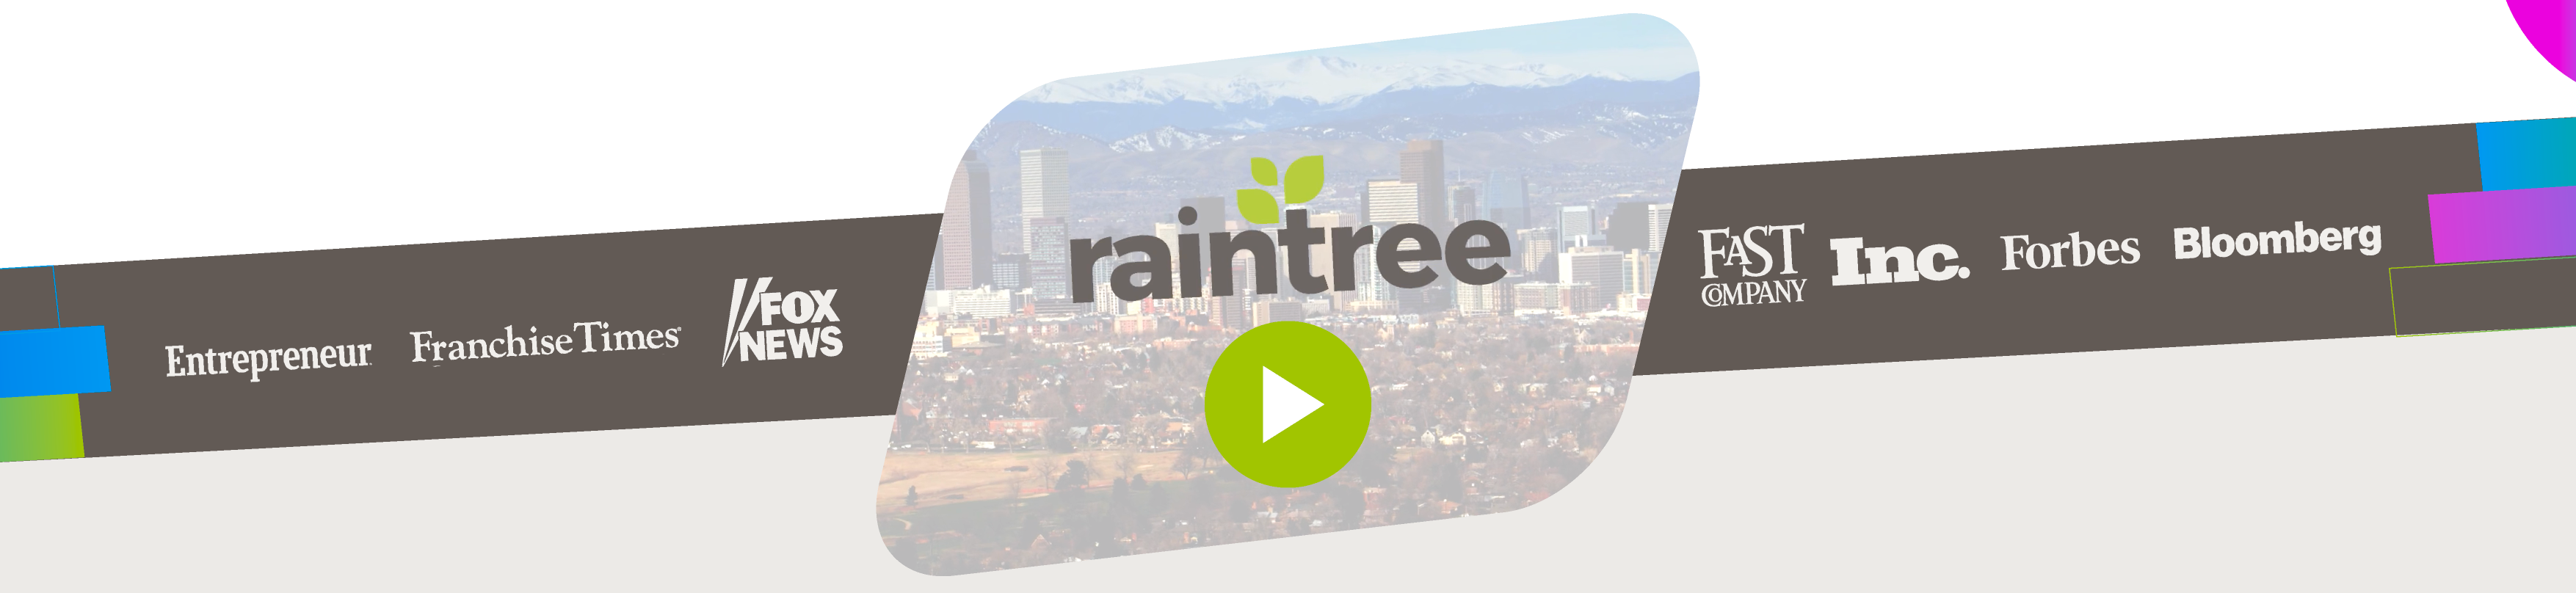 Raintree Franchise Growth Featured In Banner With Video